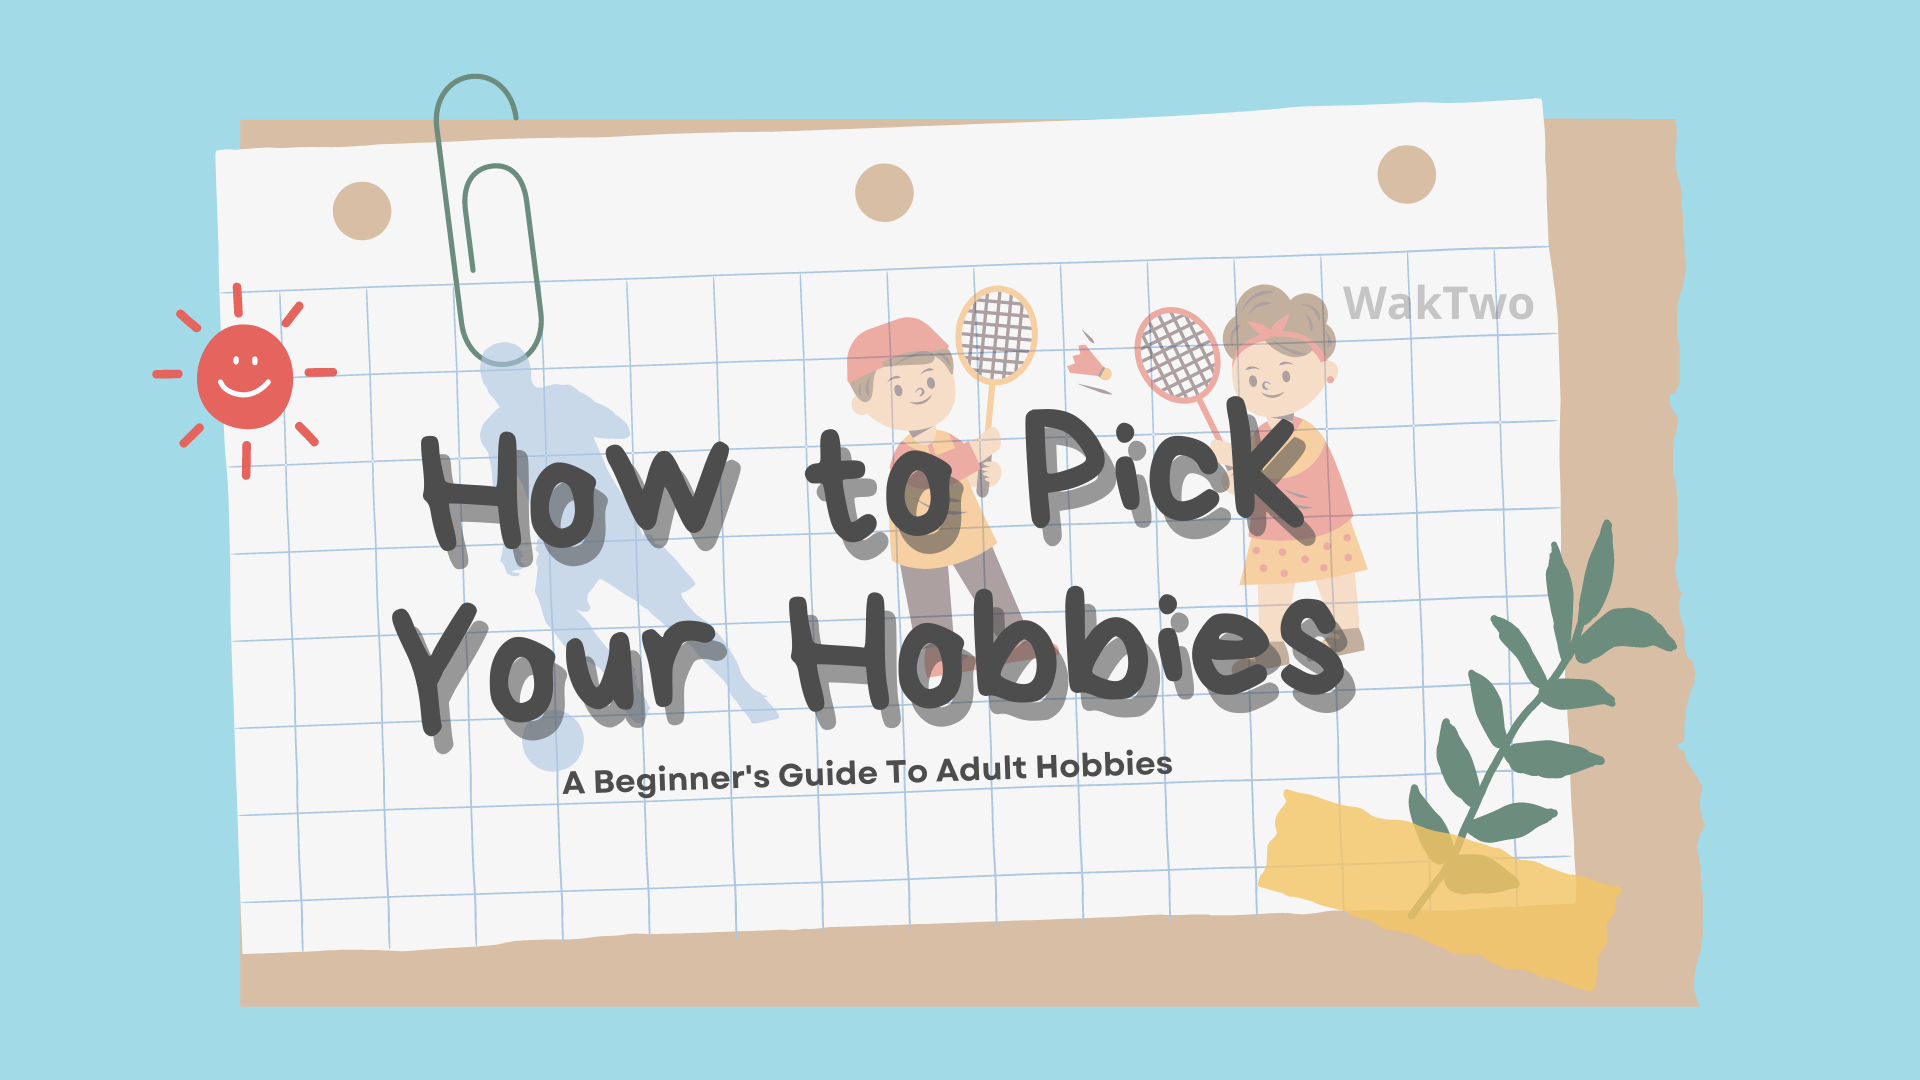 HOW TO PICK YOUR HOBBIES